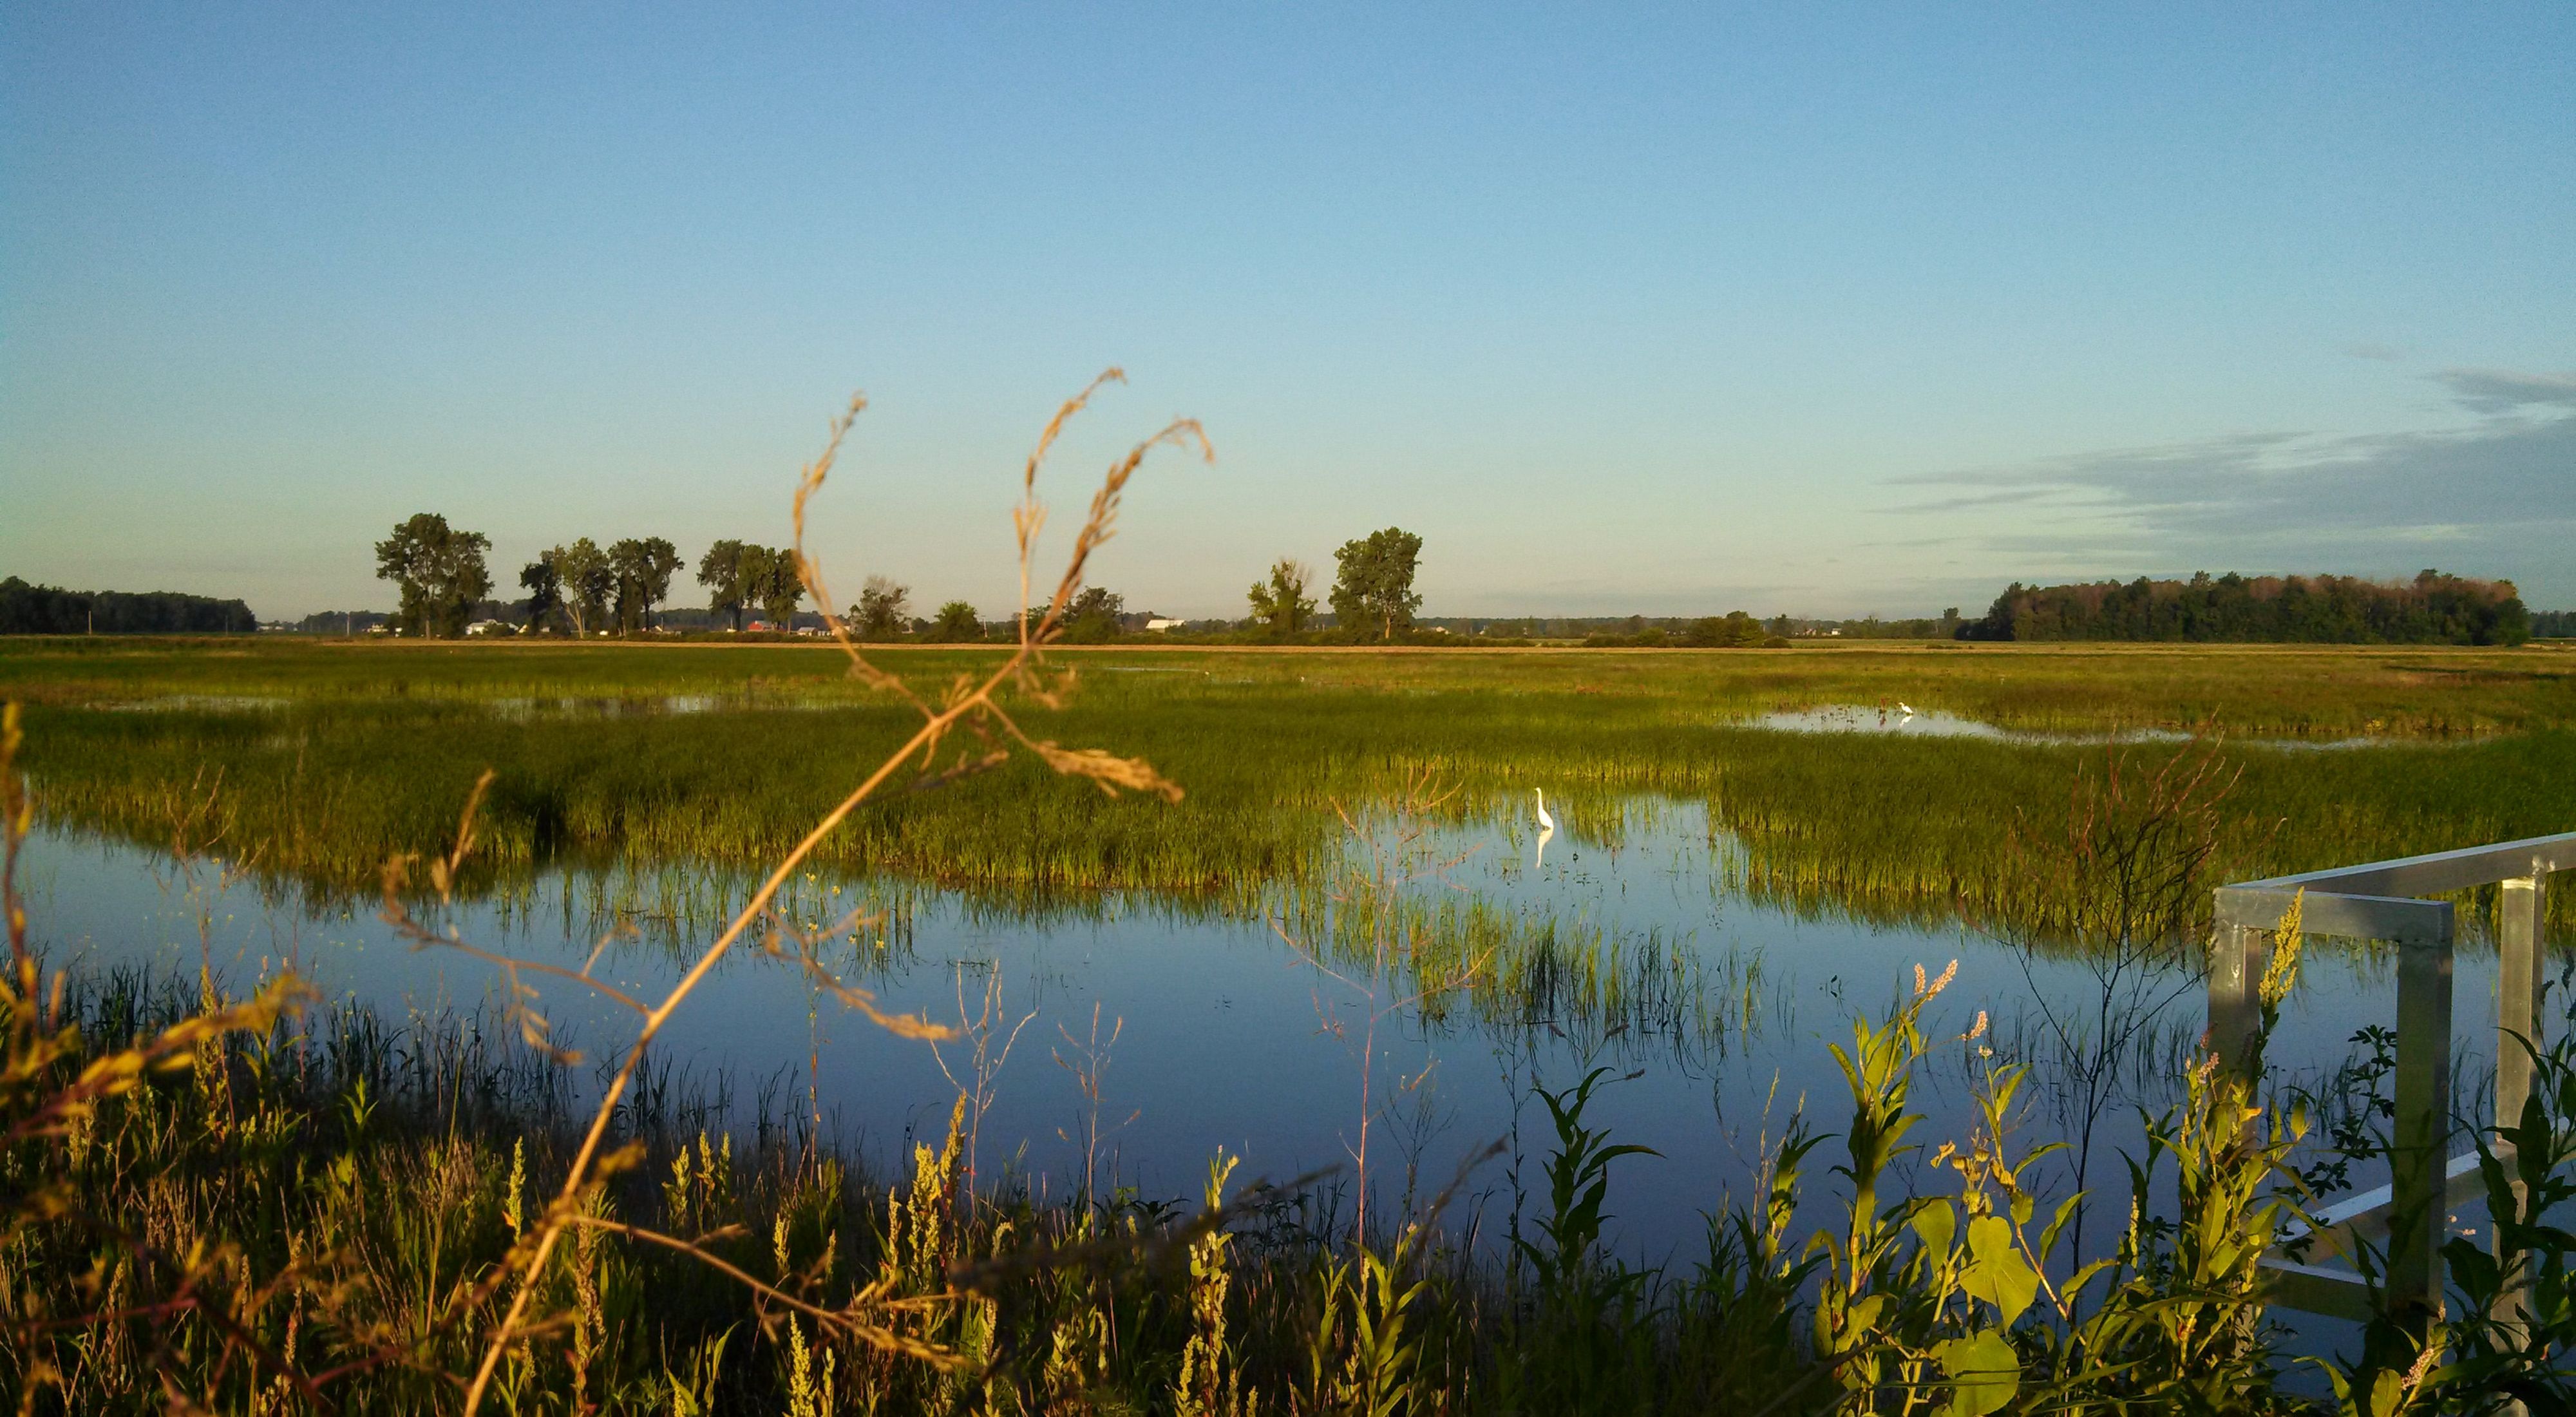 Looking over an open wetland field of grasses and water with a few white great egrets enjoying the new habitat.